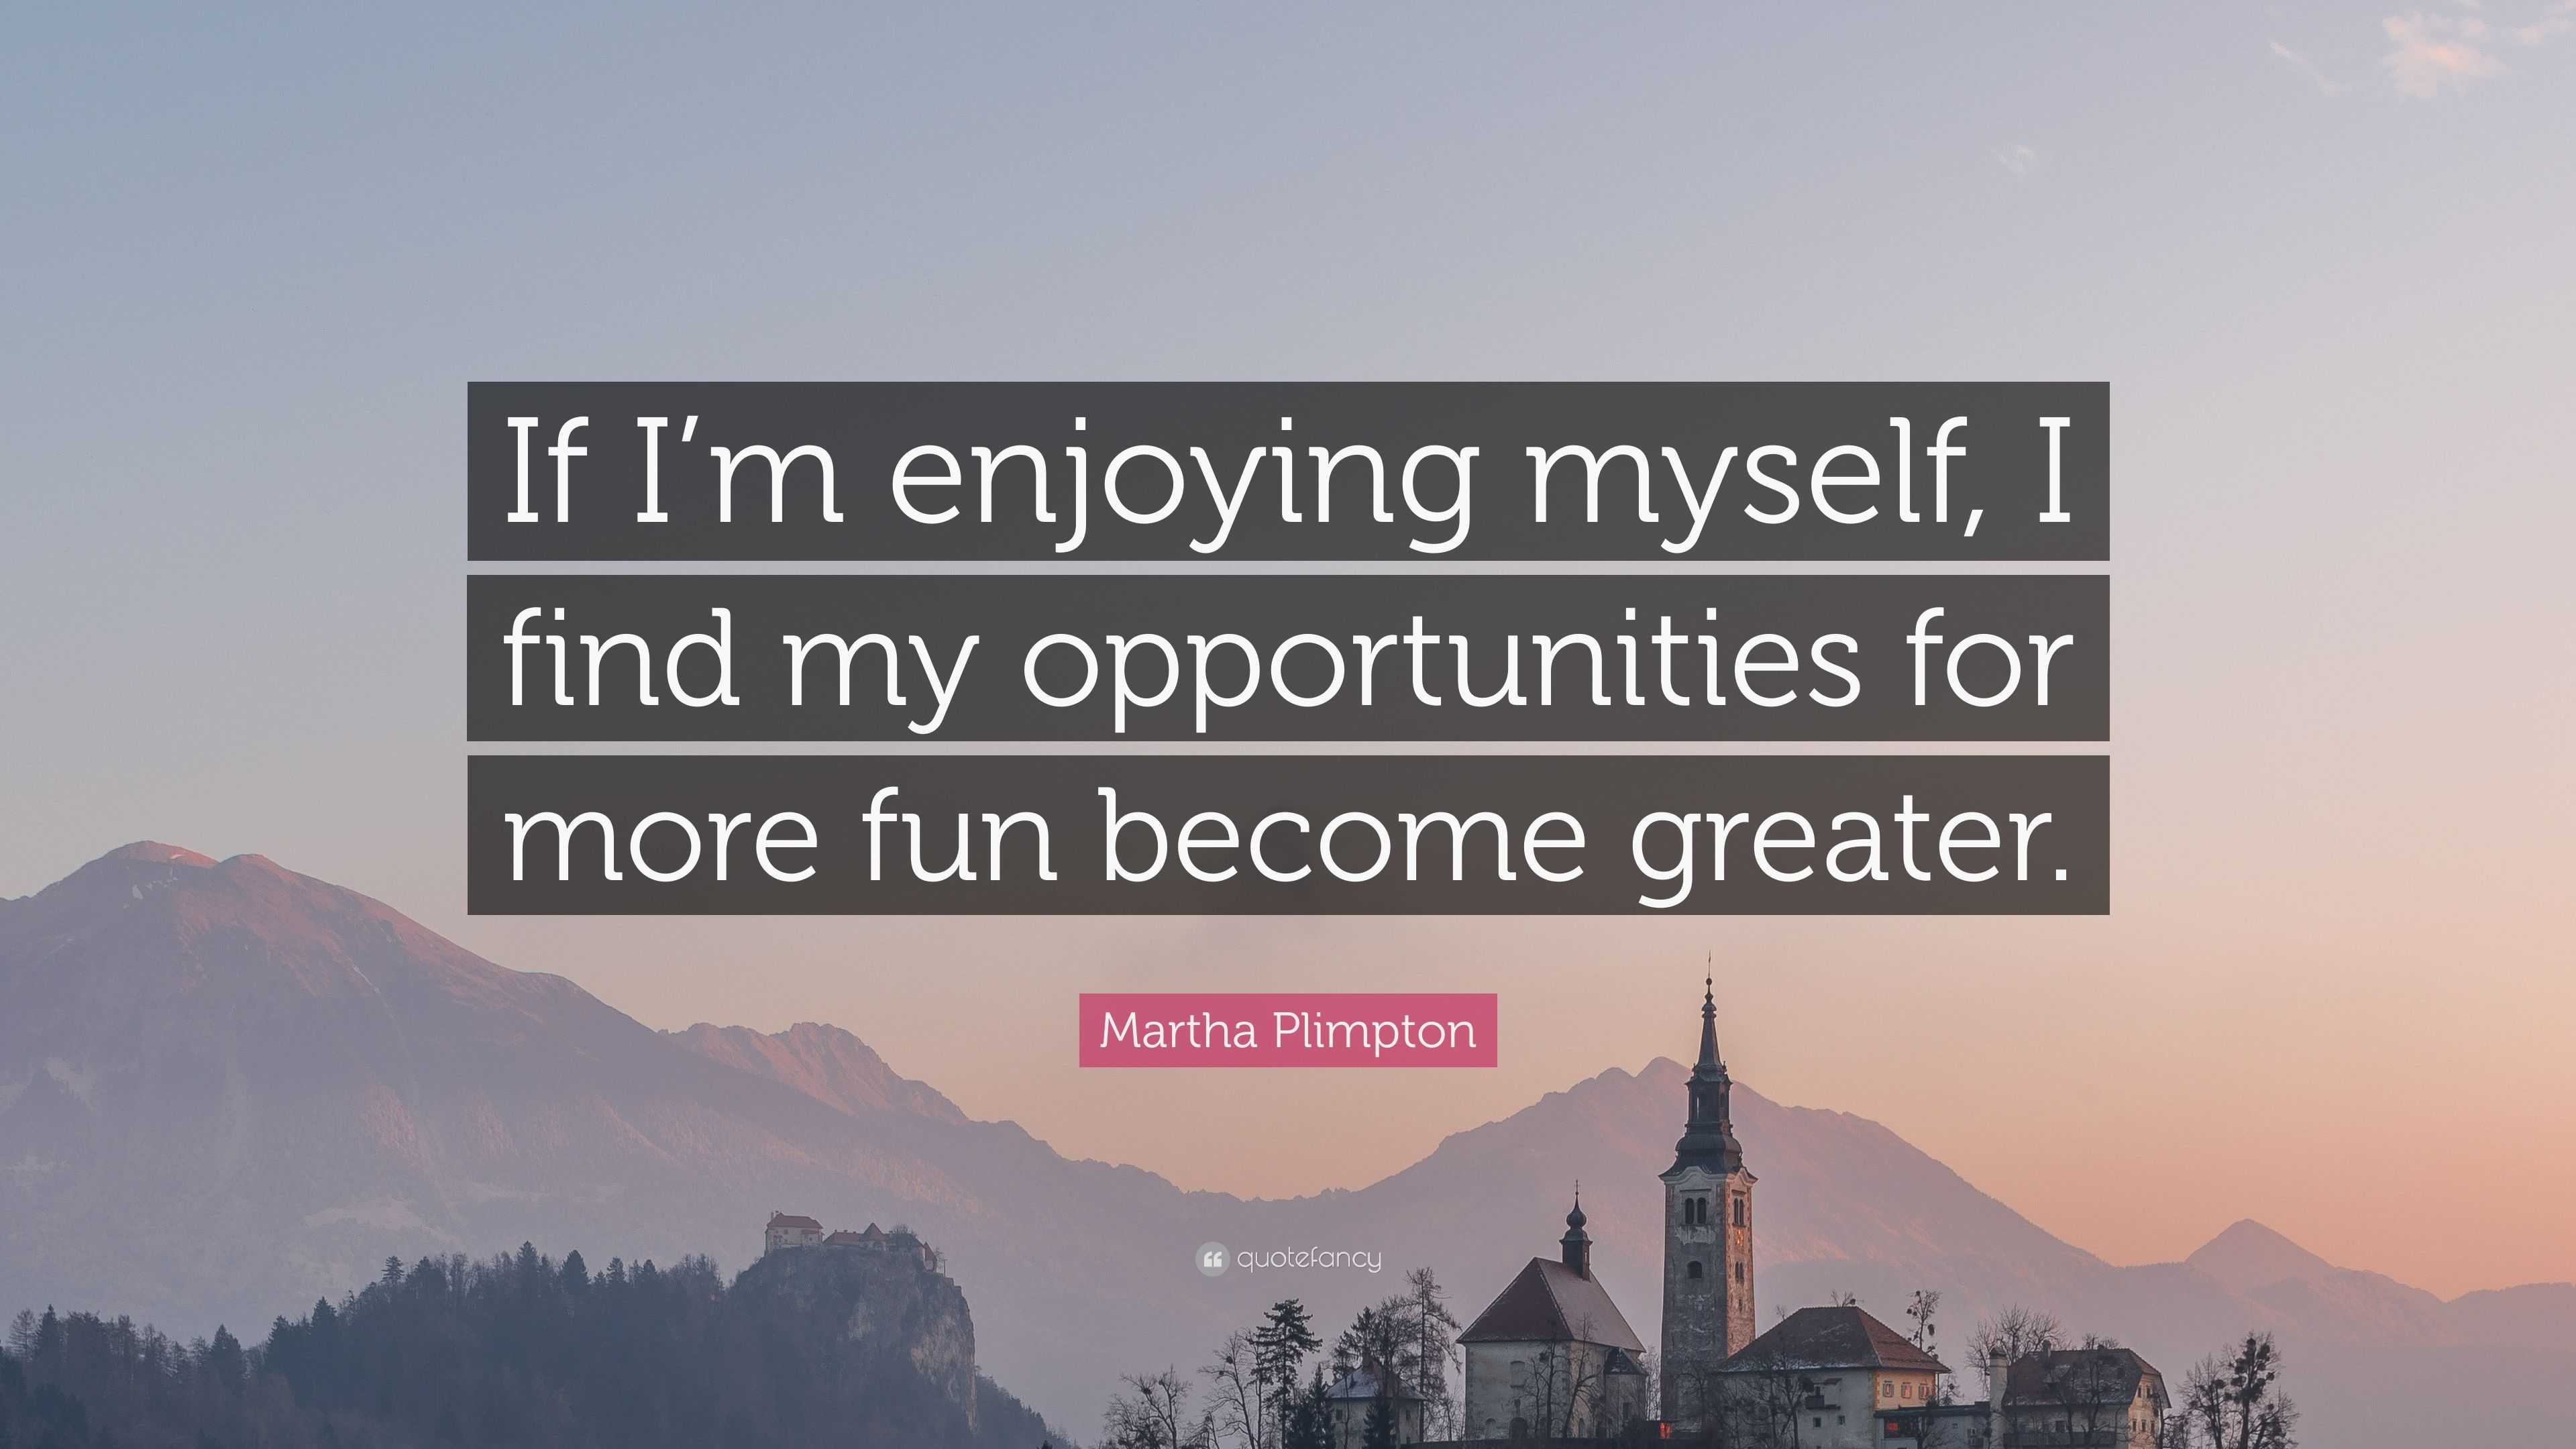 If I'm enjoying myself, I find my opportunities for more fun